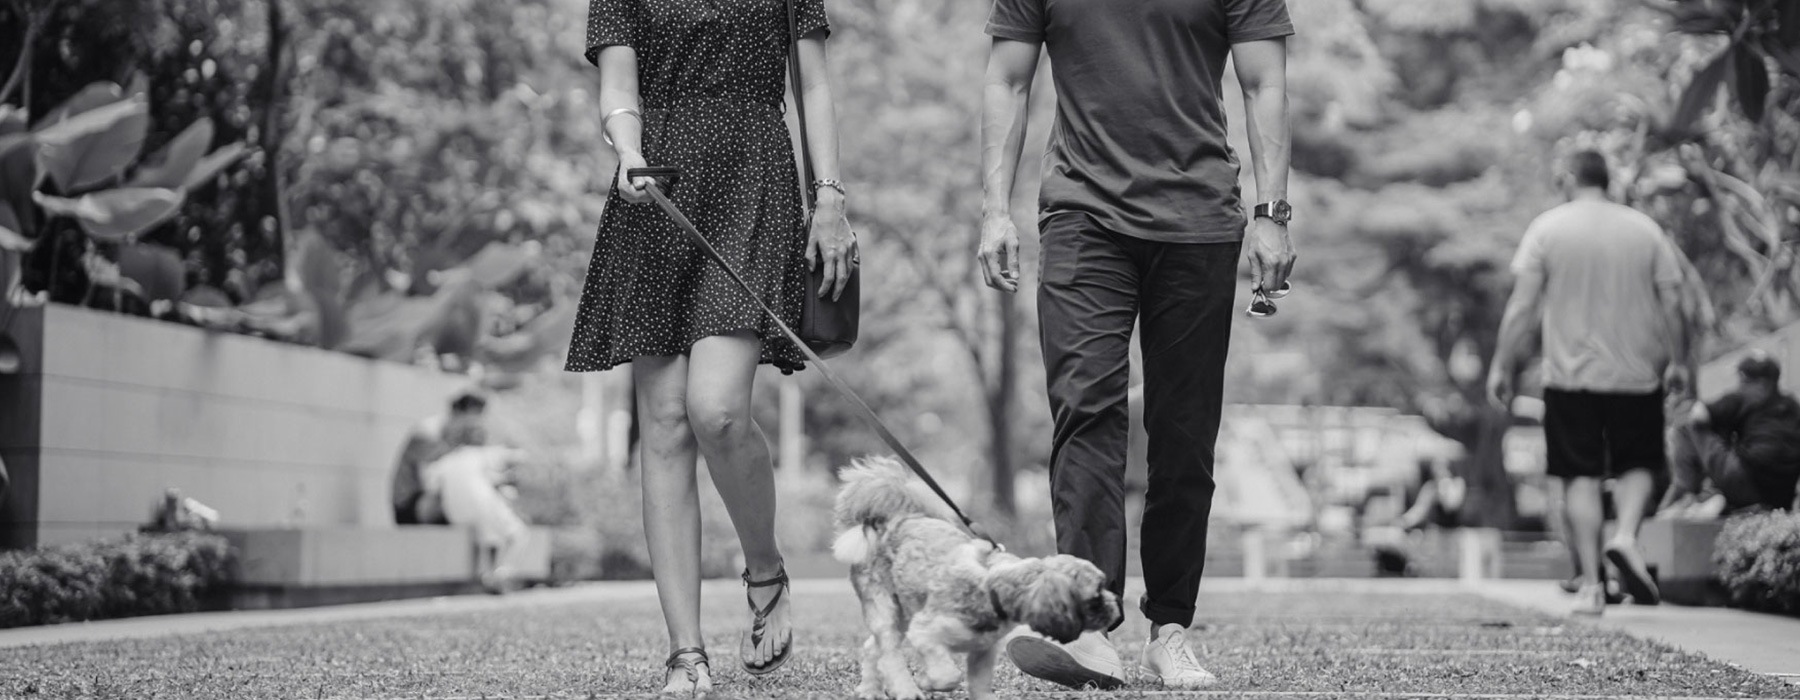 lifestyle image of two people walking their pet outside